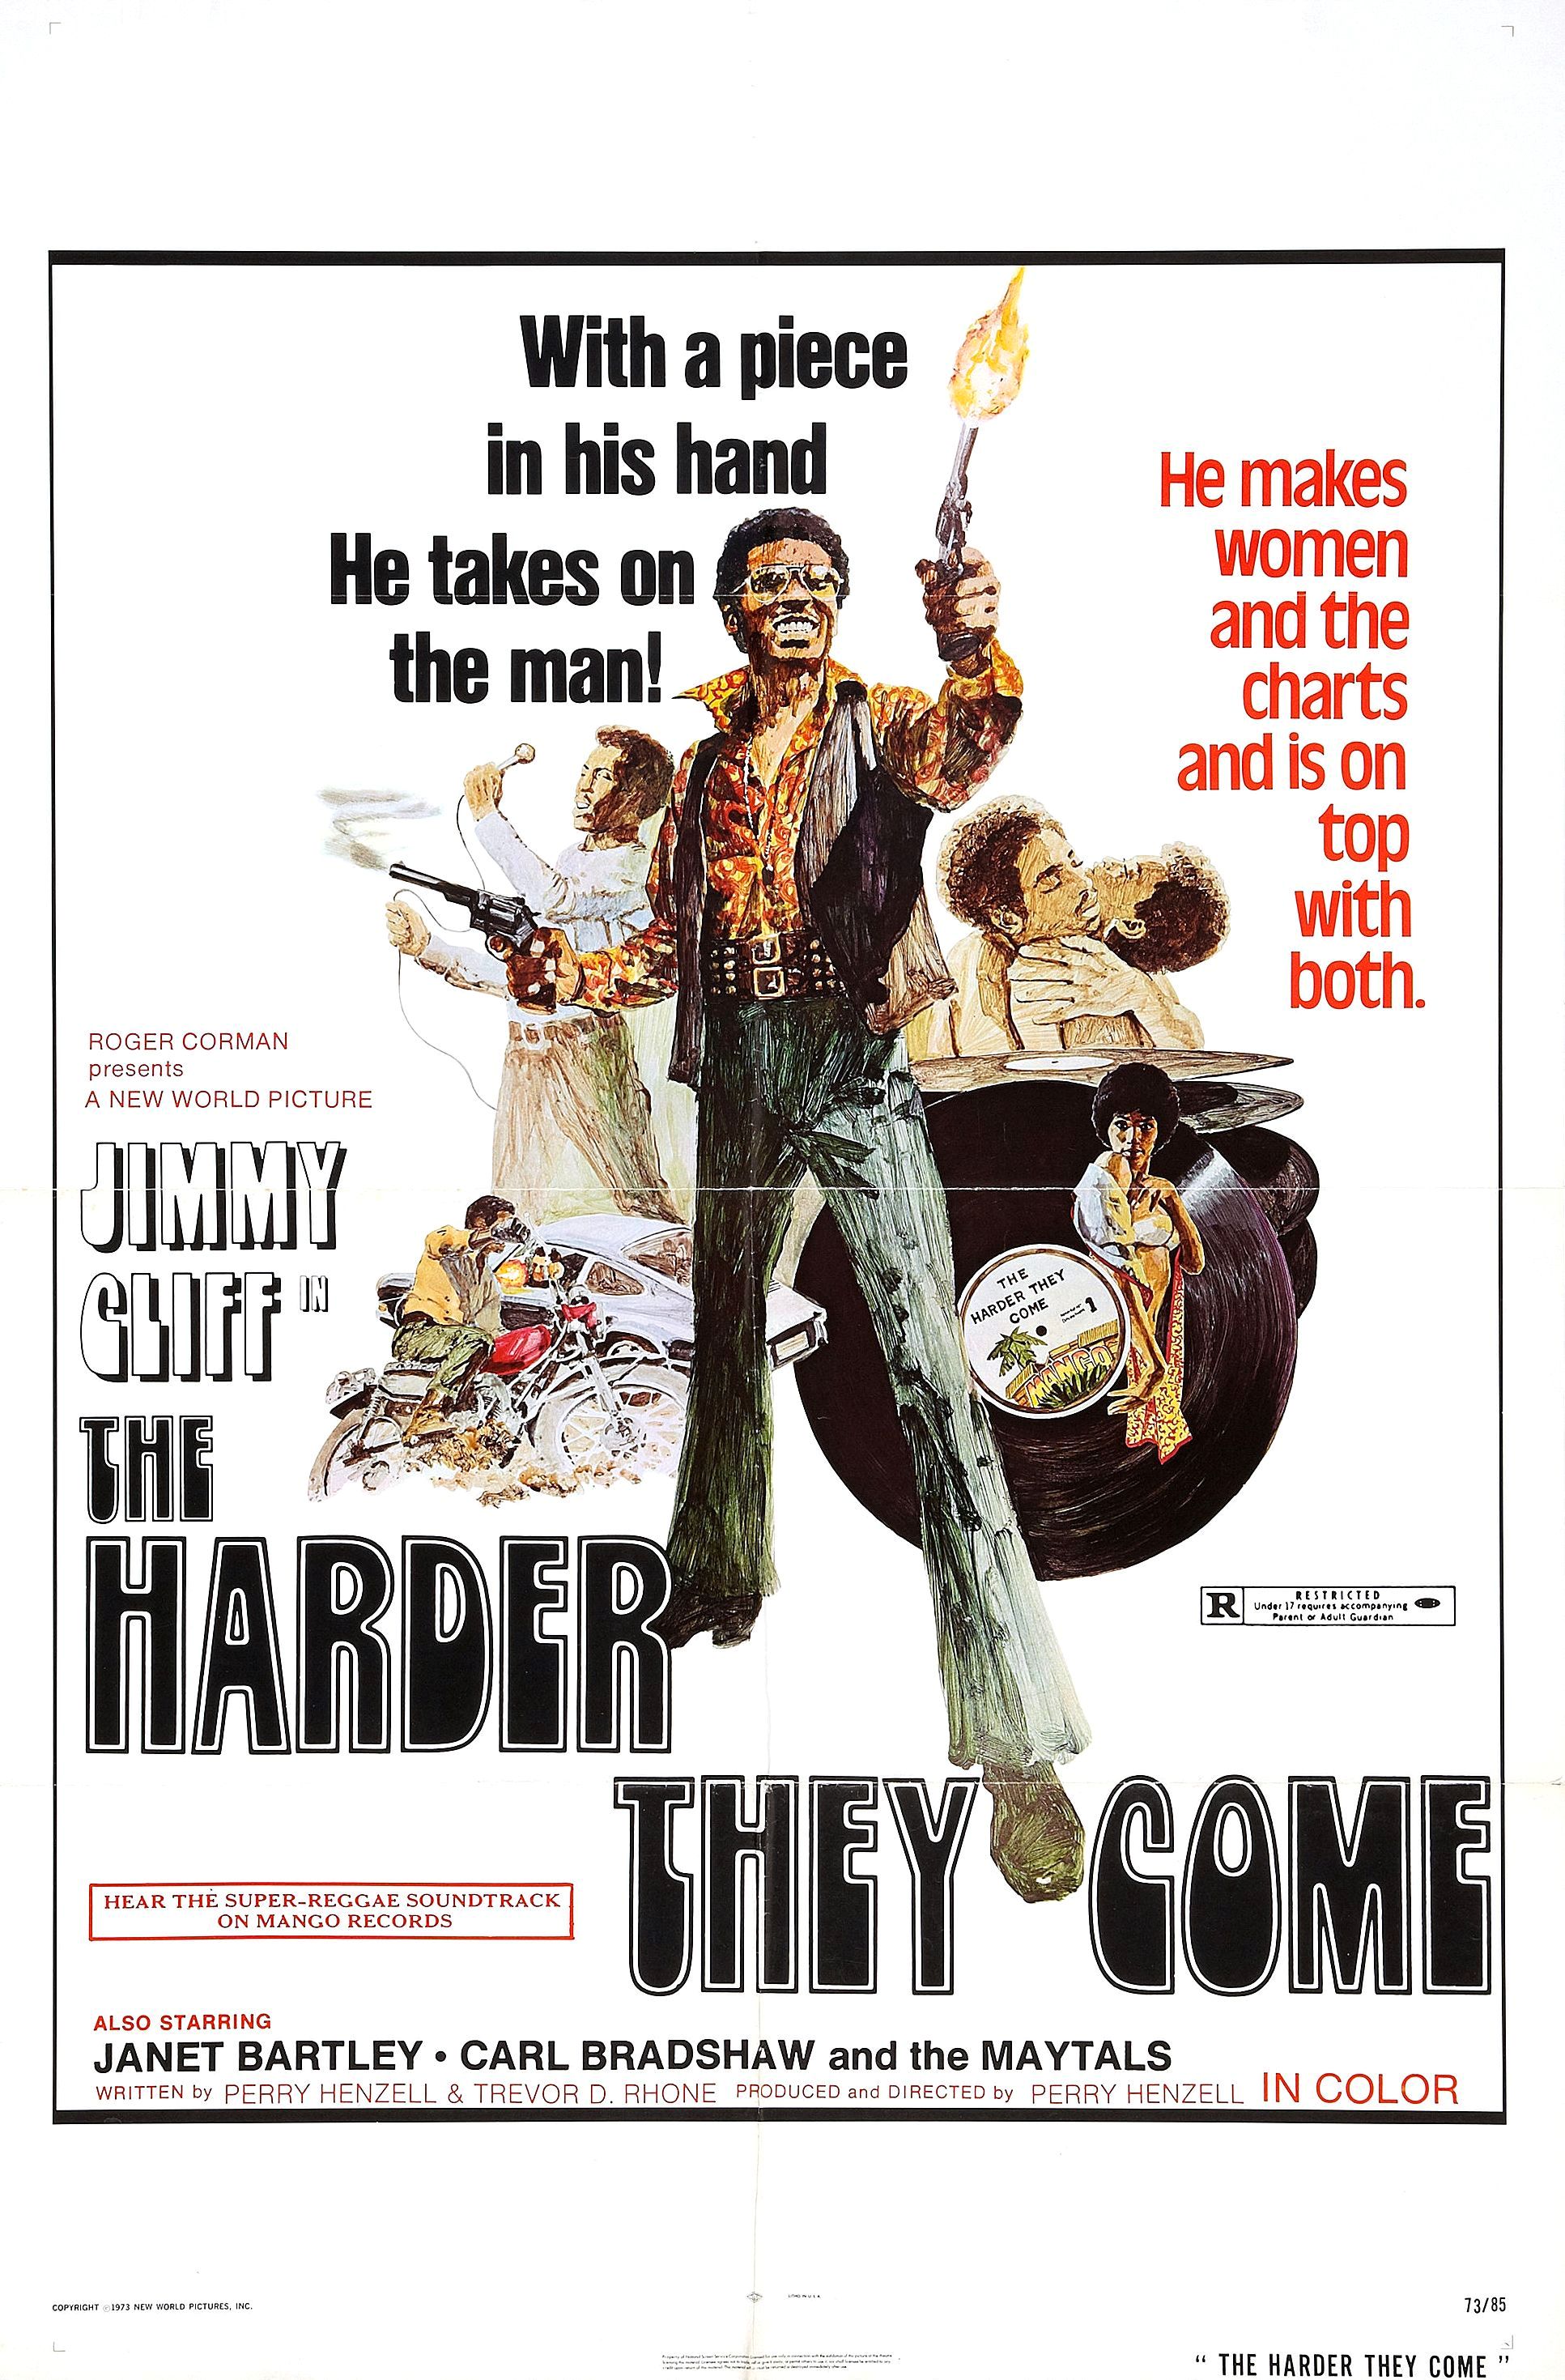 jimmy cliff movie the harder they come - With a piece in his hand He takes on the man! He makes women and the charts and is on top with both. Jimmy Gmff The A Re They Come Janet Bartley. Carl Bradshaw and the Maytals Perry P Hone Sehen In Color The Ardei 